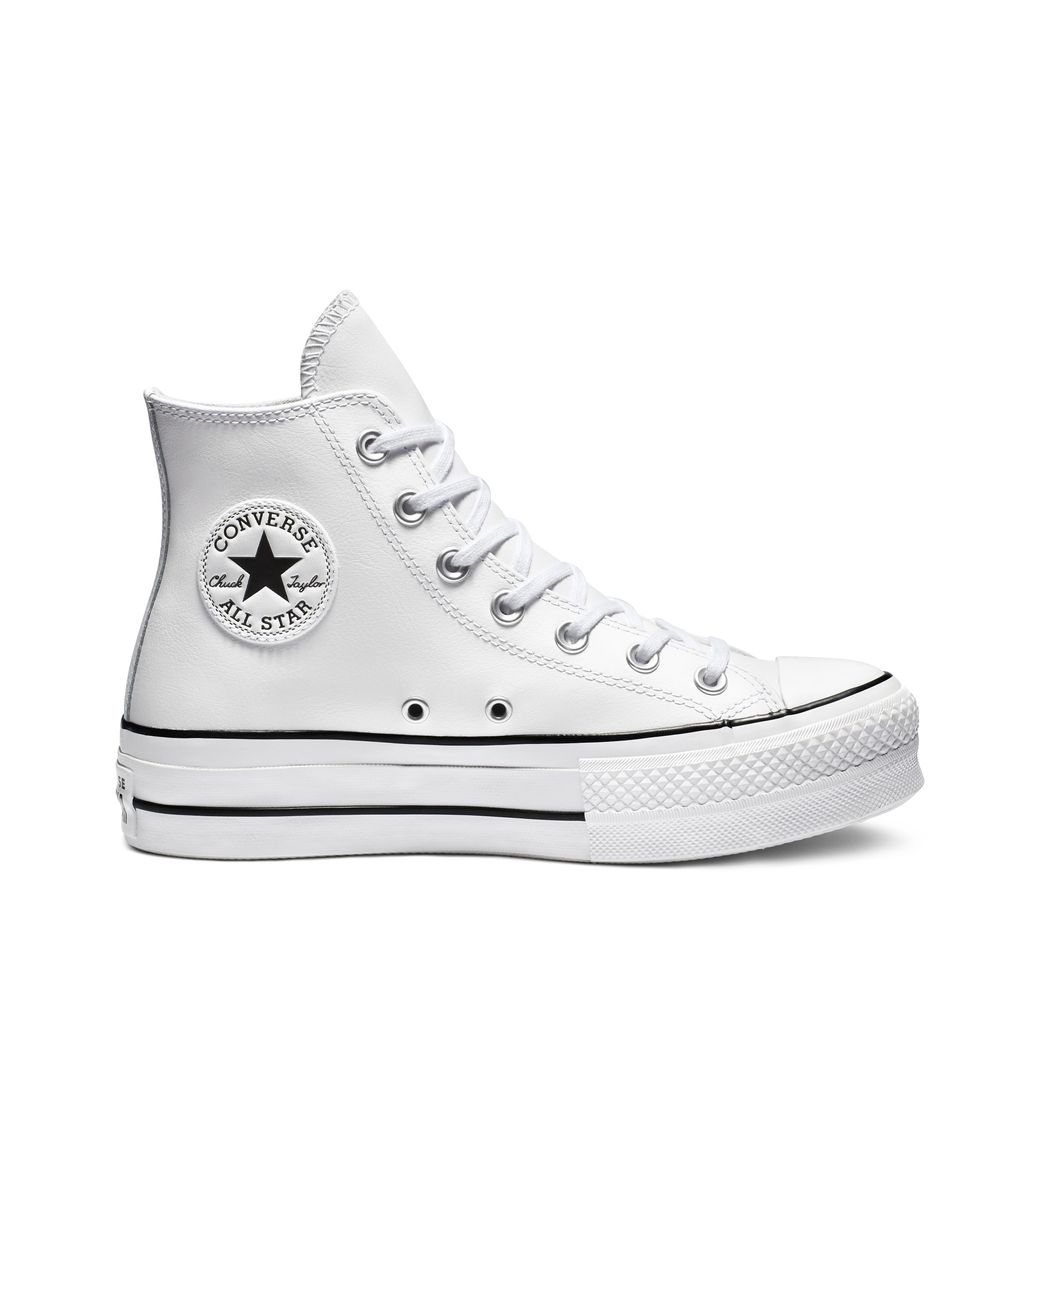 Converse Chuck Taylor All Star Platform Clean Leather High Top in White ...